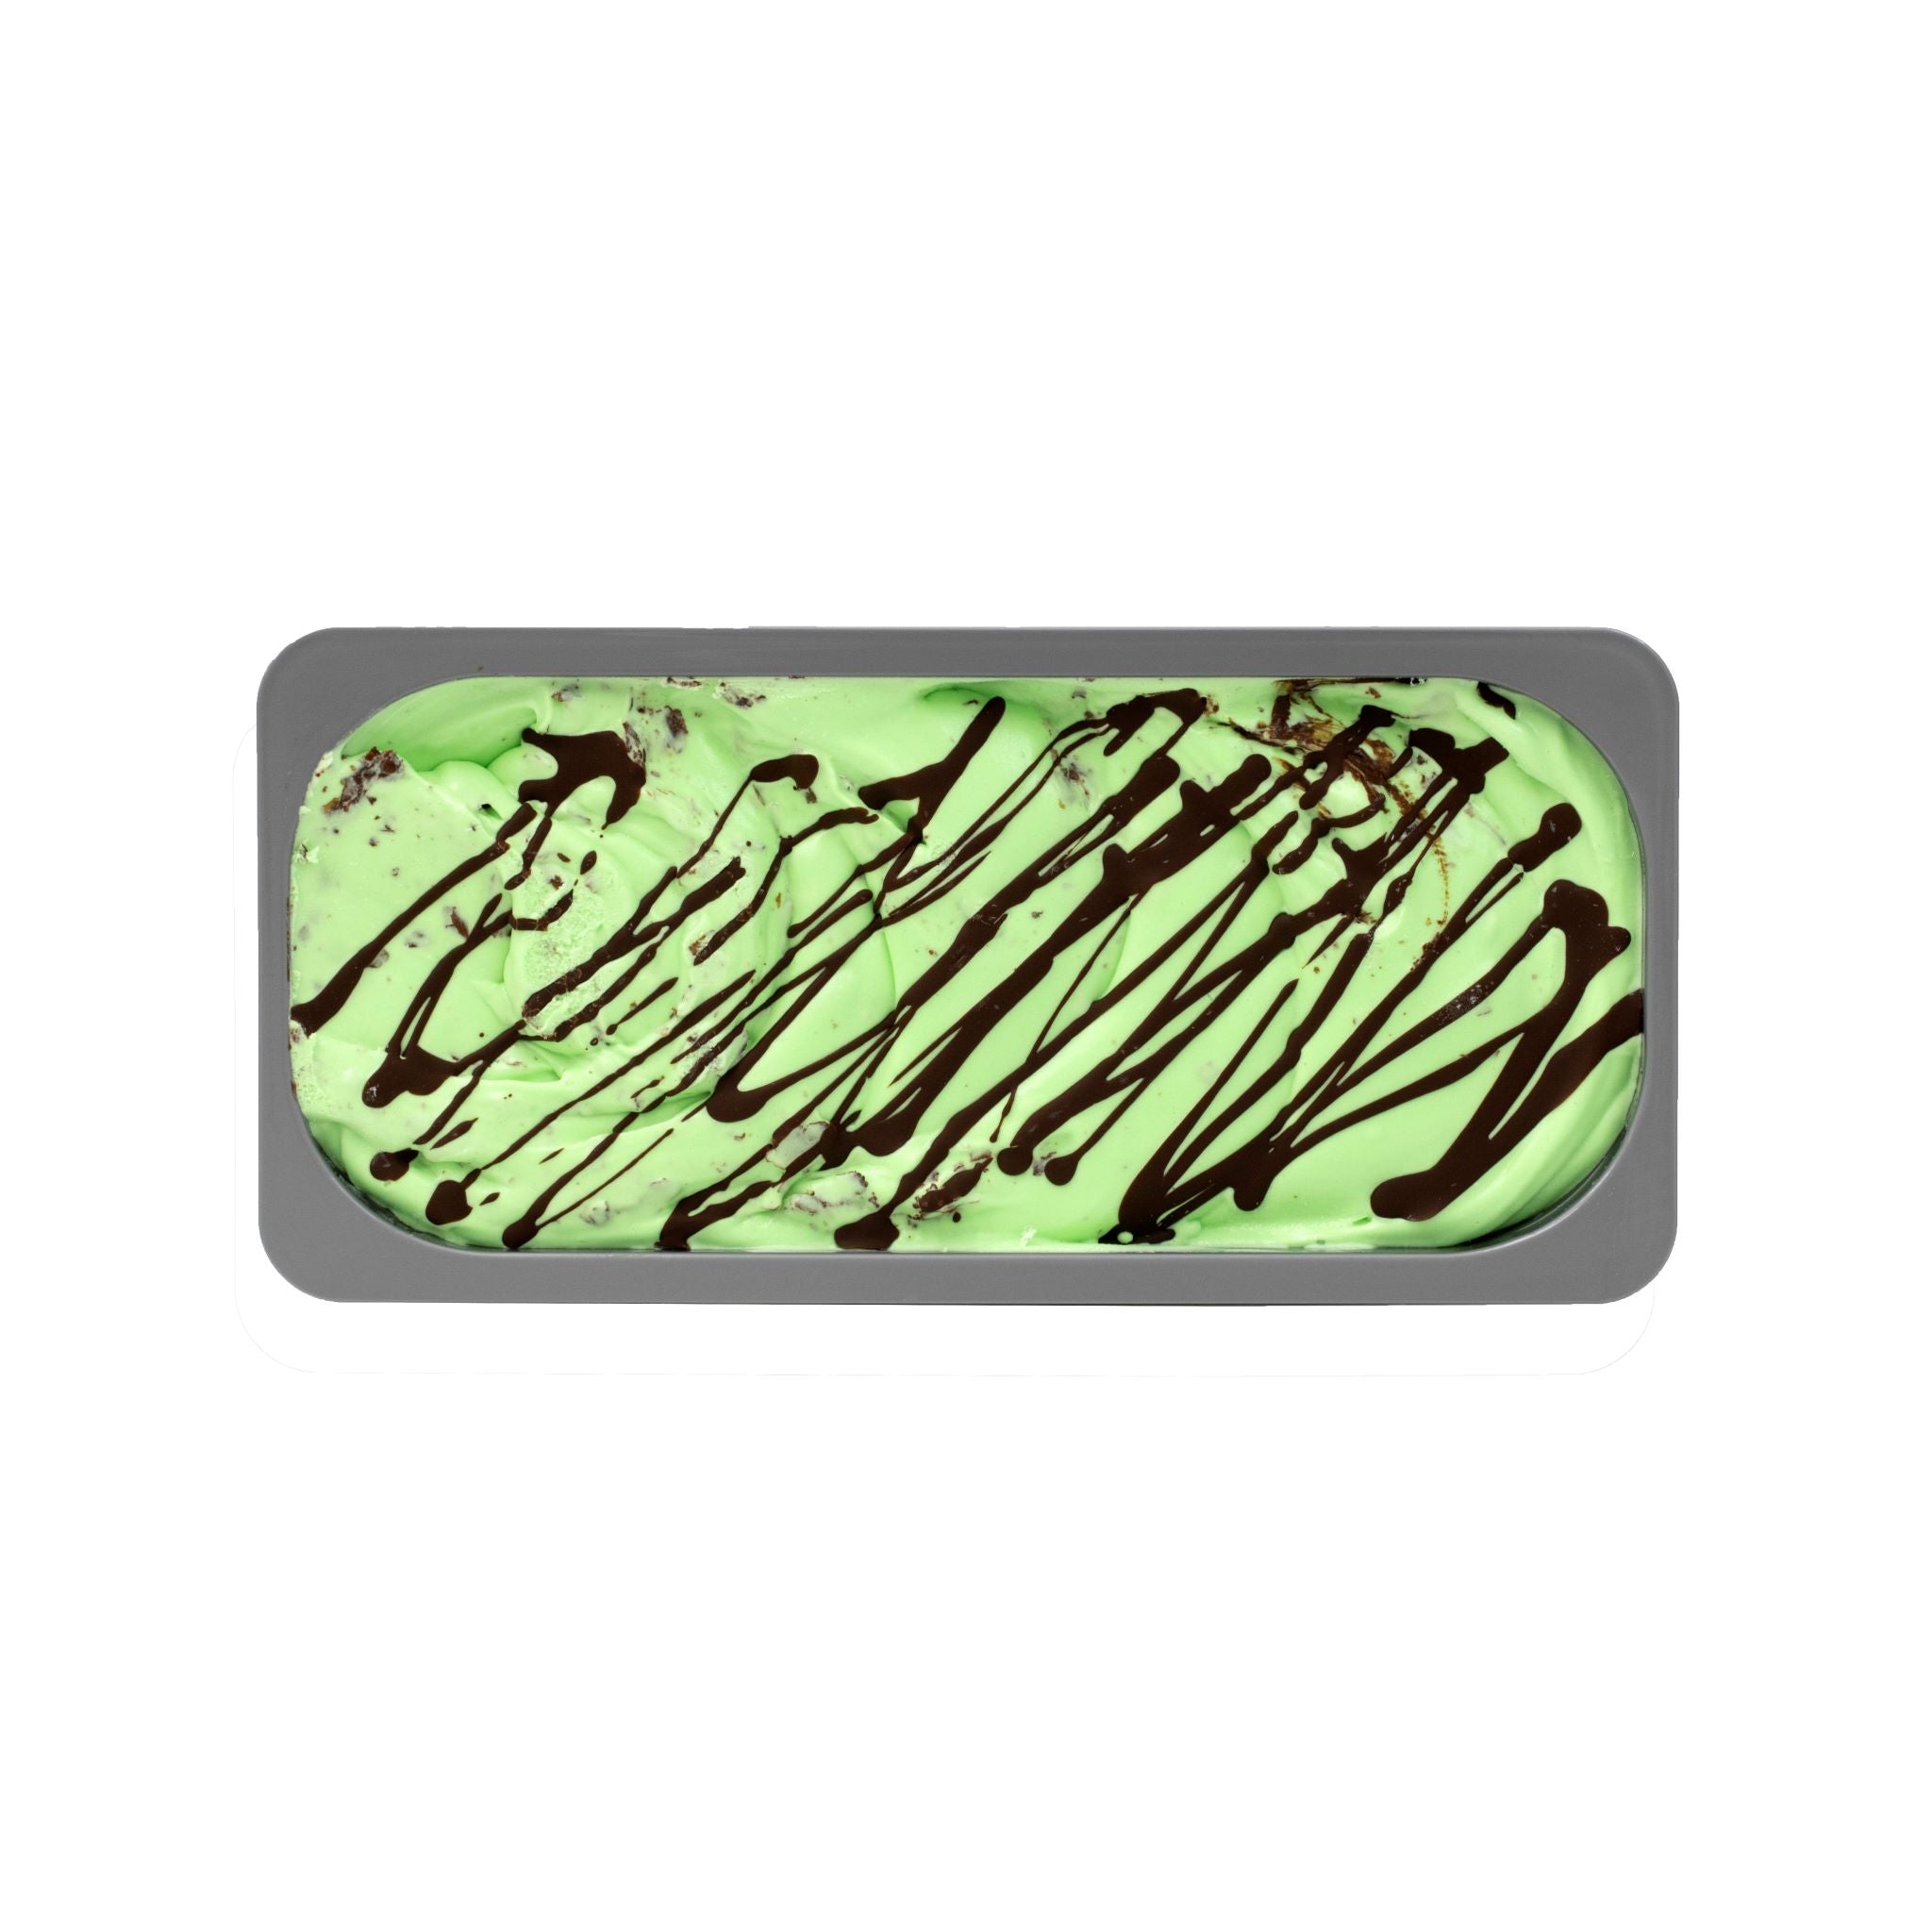 Chocolate chip mint gelato is a luscious frozen dessert that blends the classic flavors of chocolate and mint into a creamy, refreshing treat. It is made with high-quality ingredients, including fresh mint leaves, chocolate chips, and whole milk. The mint adds a cool, refreshing flavor, while the chocolate chips provide a rich, indulgent texture and taste.